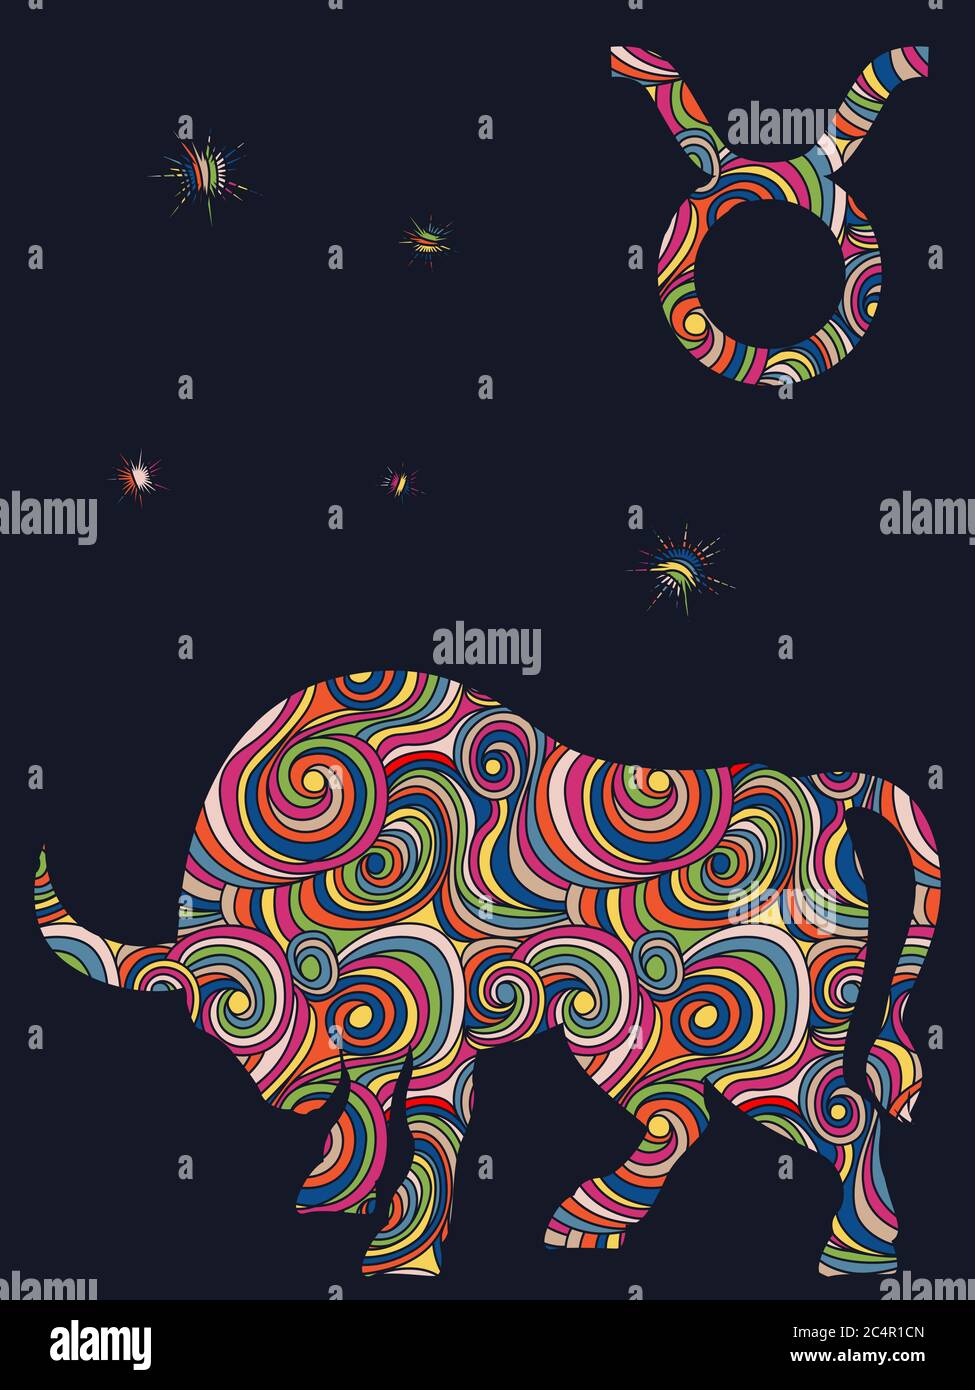 Zodiac sign Taurus fill with colorful muted wavy shapes on the dark gray background with stars and astrological symbols, vector illustration Stock Vector